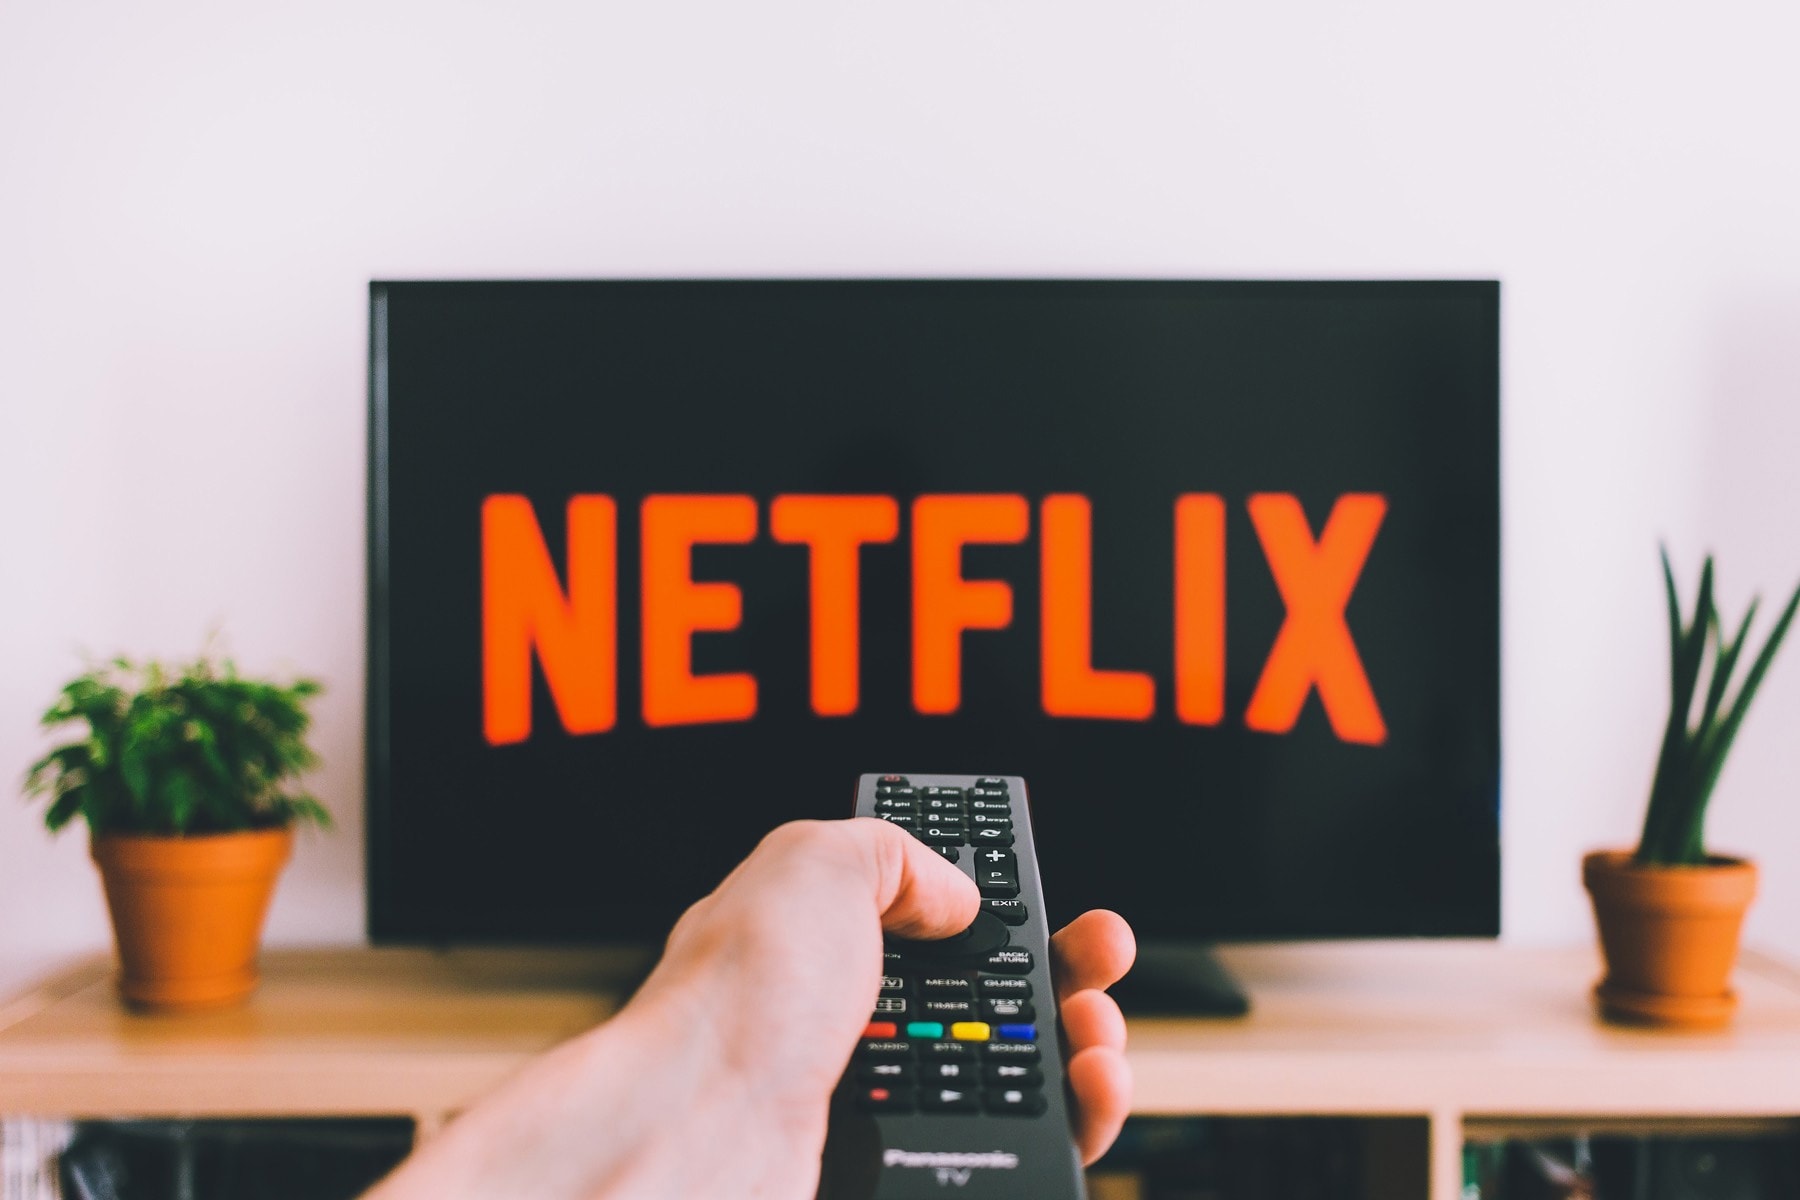 Netflix Reveals Results by Region in New SEC Filing asia-pacific europe middle east africa latin america u.s. canada low results streaming media services provider triple-digit growth